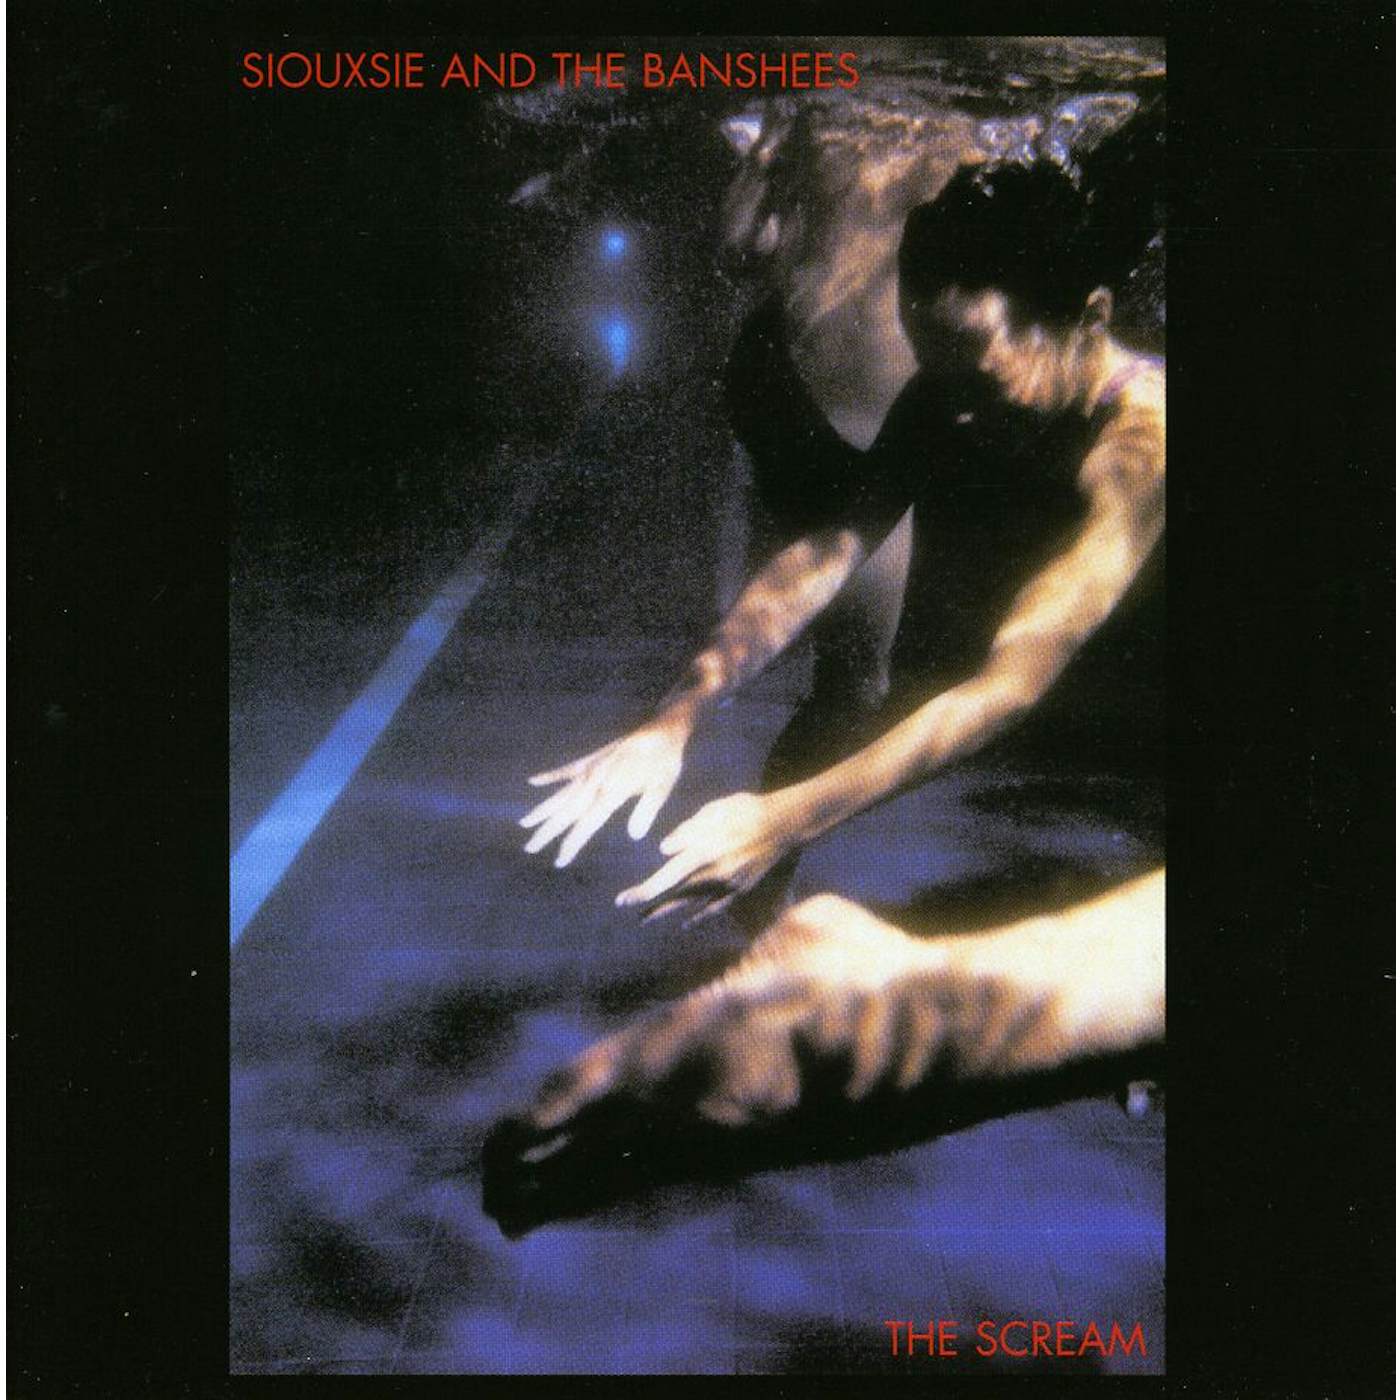 Siouxsie and the Banshees SCREAM CD